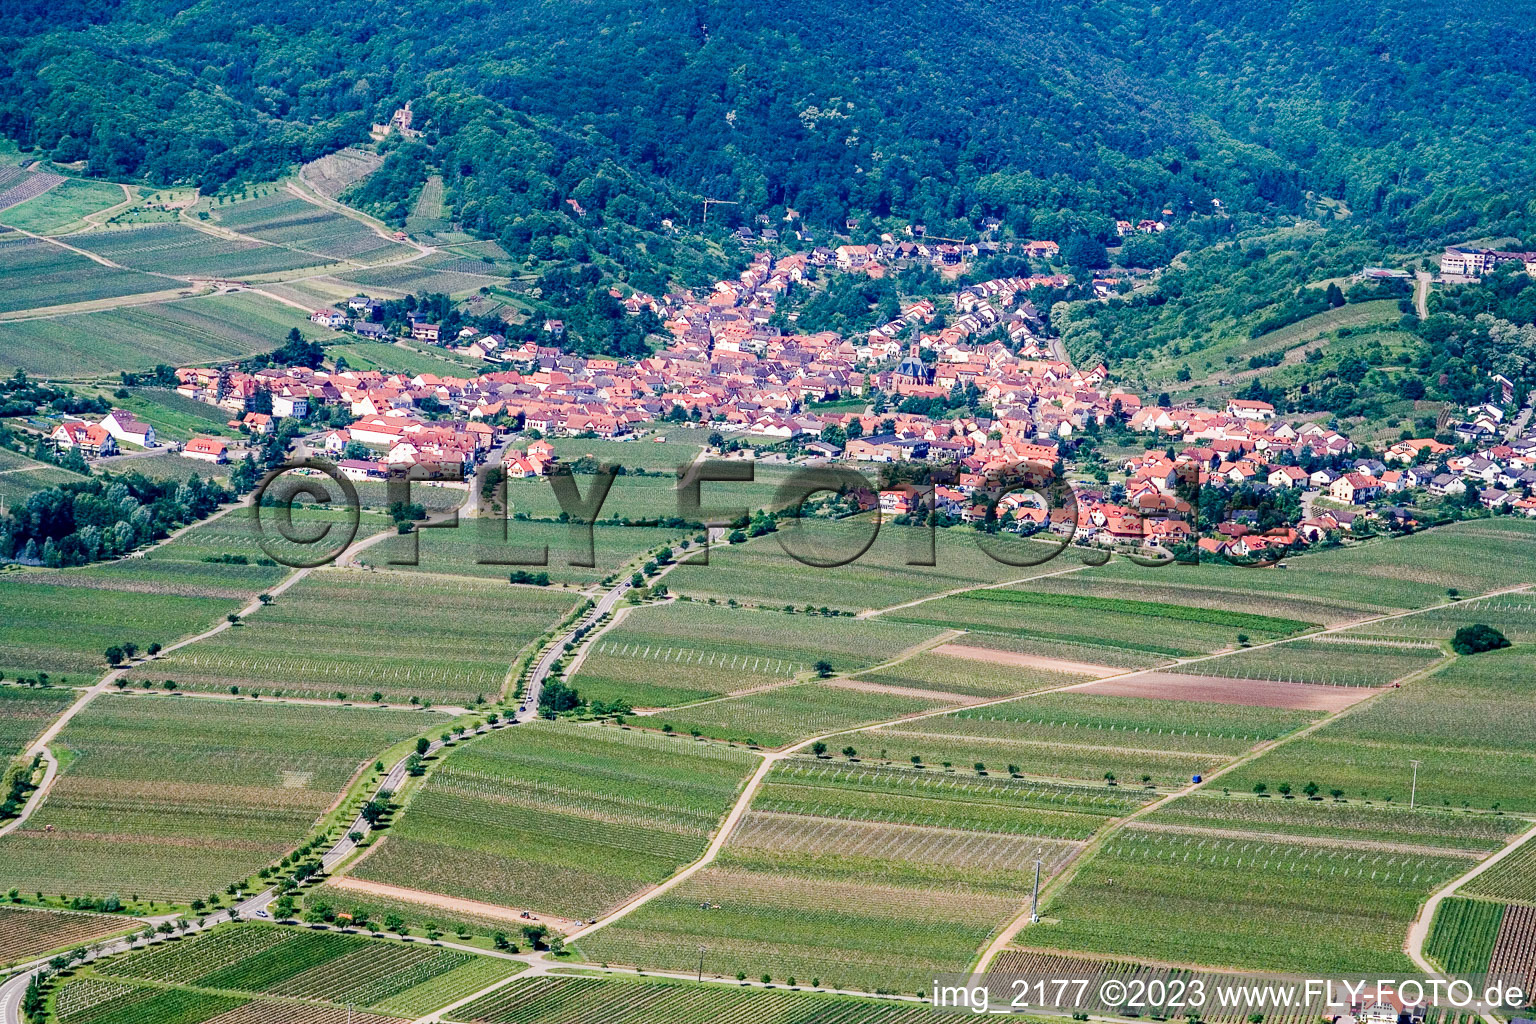 Drone image of Sankt Martin in the state Rhineland-Palatinate, Germany